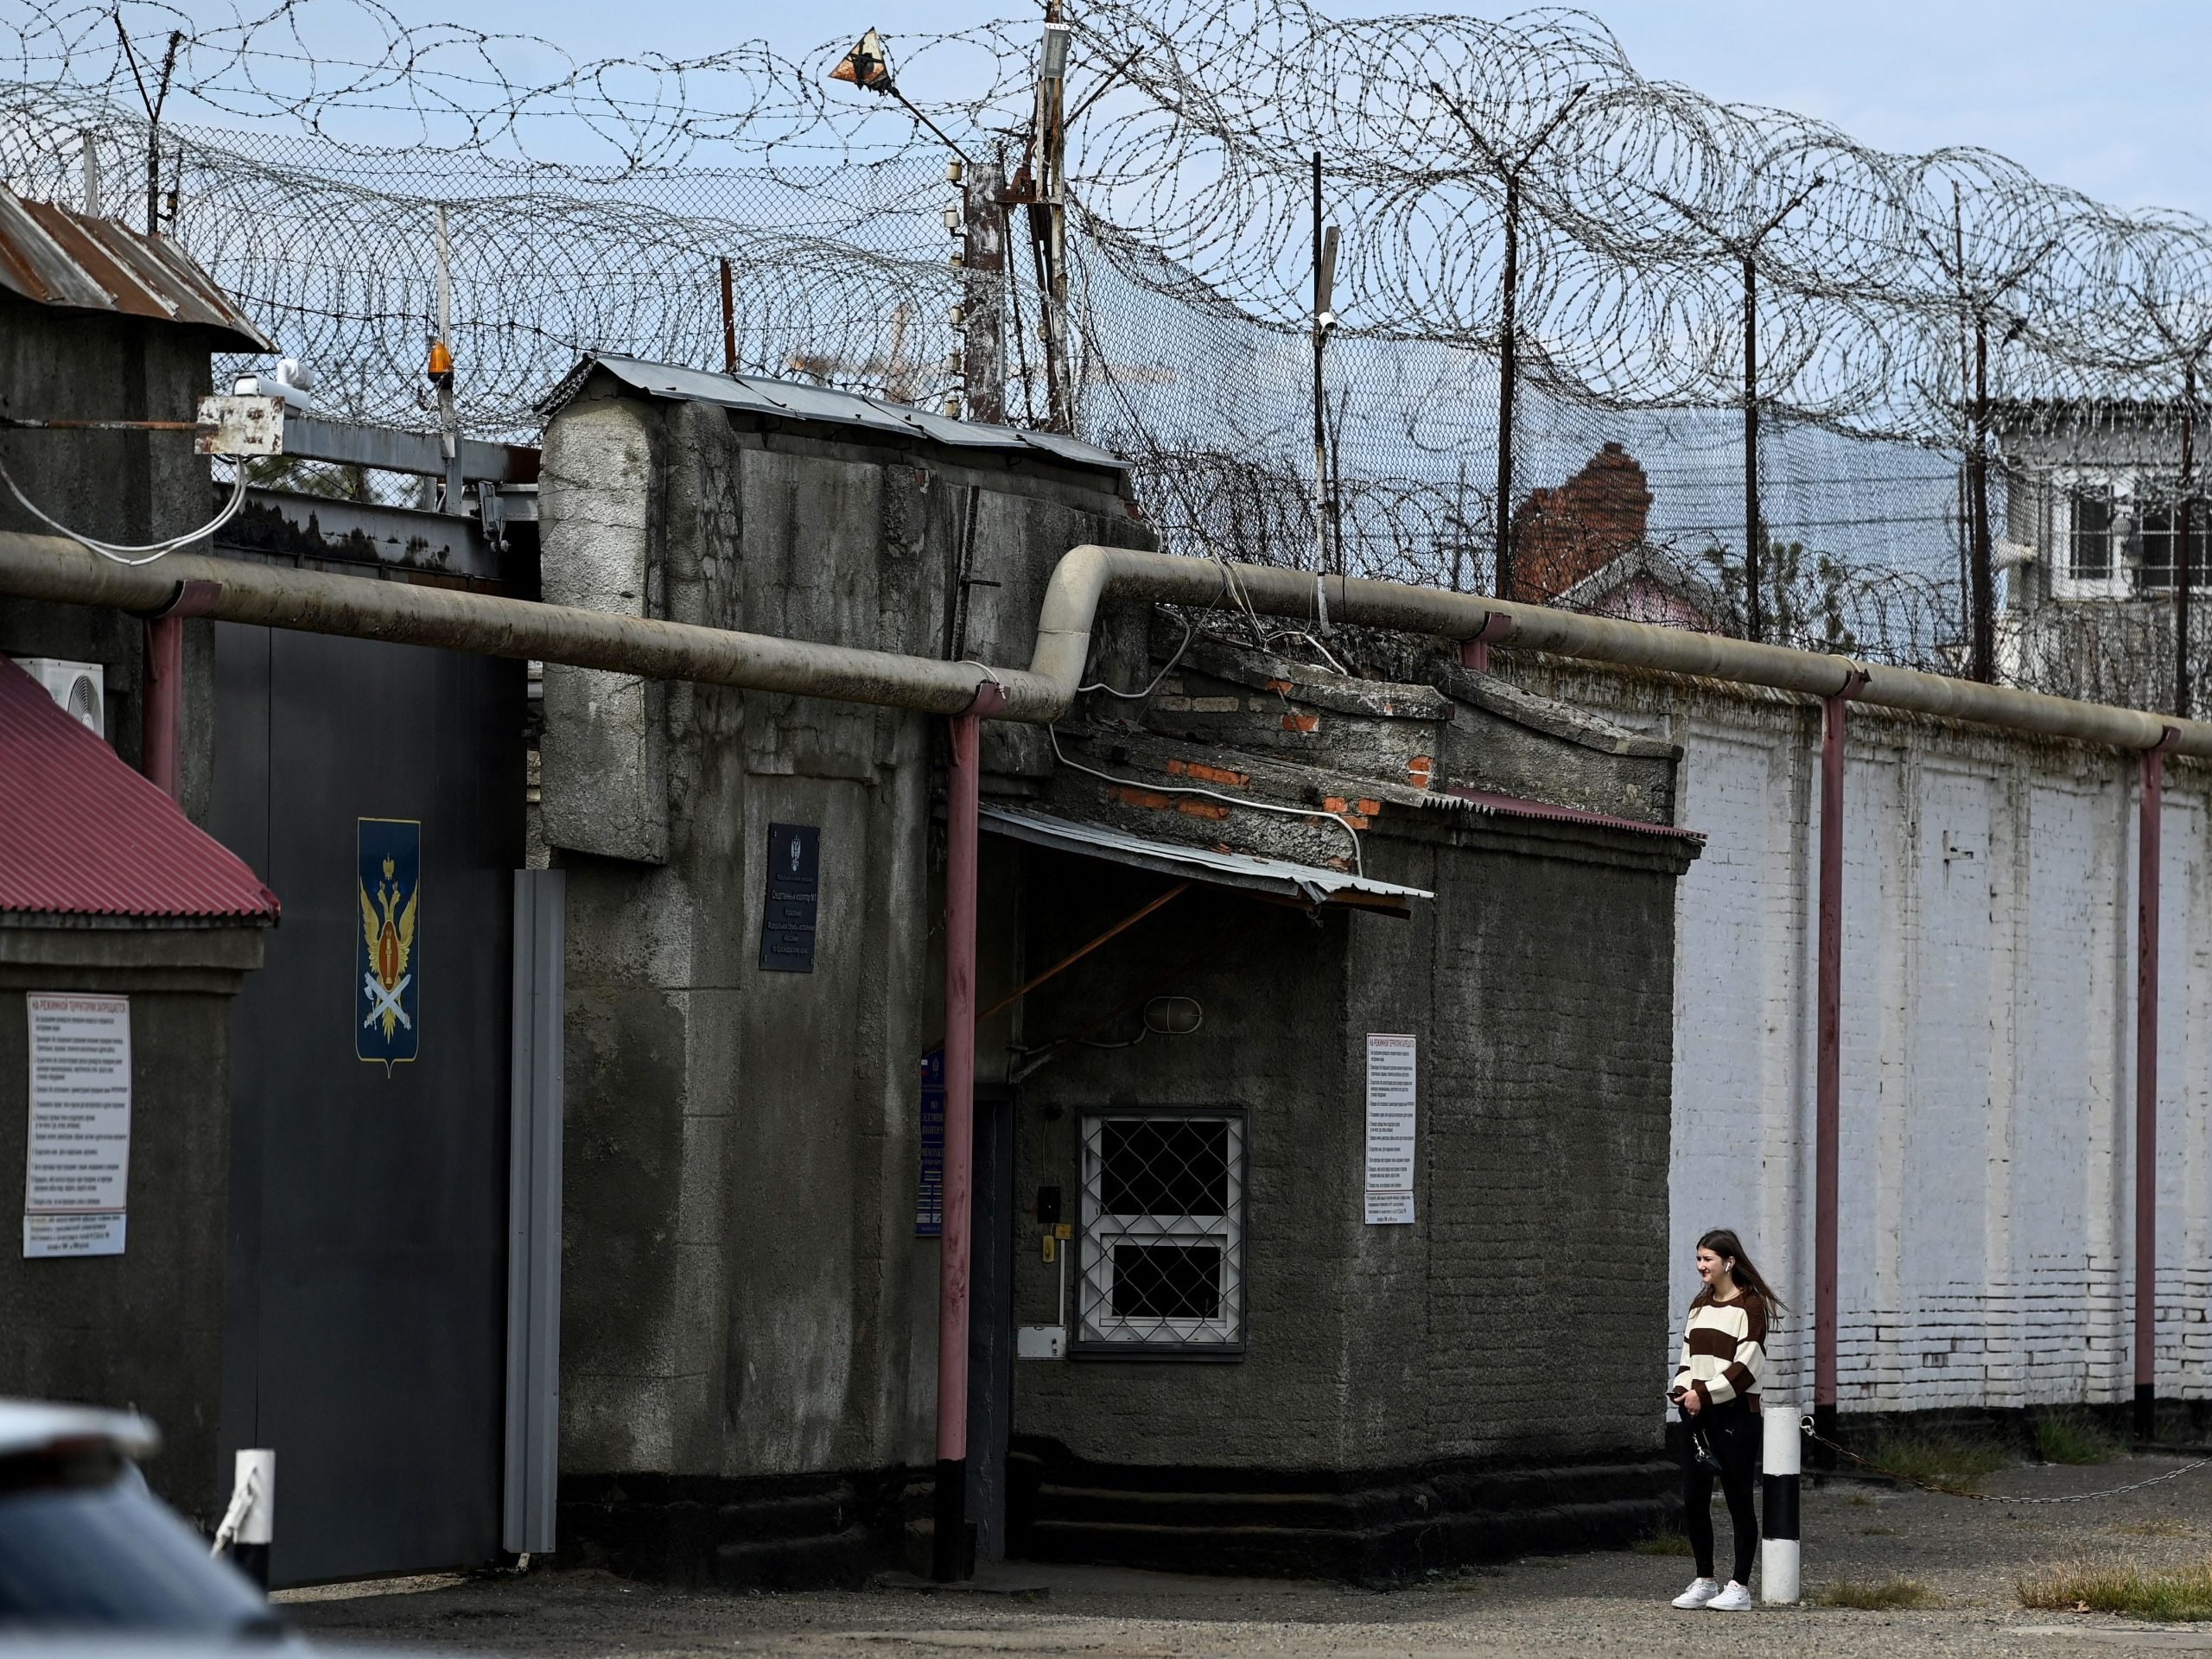 Detention Centre no. 1, where Andrei Pivovarov - former head of the exiled Kremlin critic Mikhail Khodorkovsky's pro-democracy group Open Russia — is being held after his arrest last year.